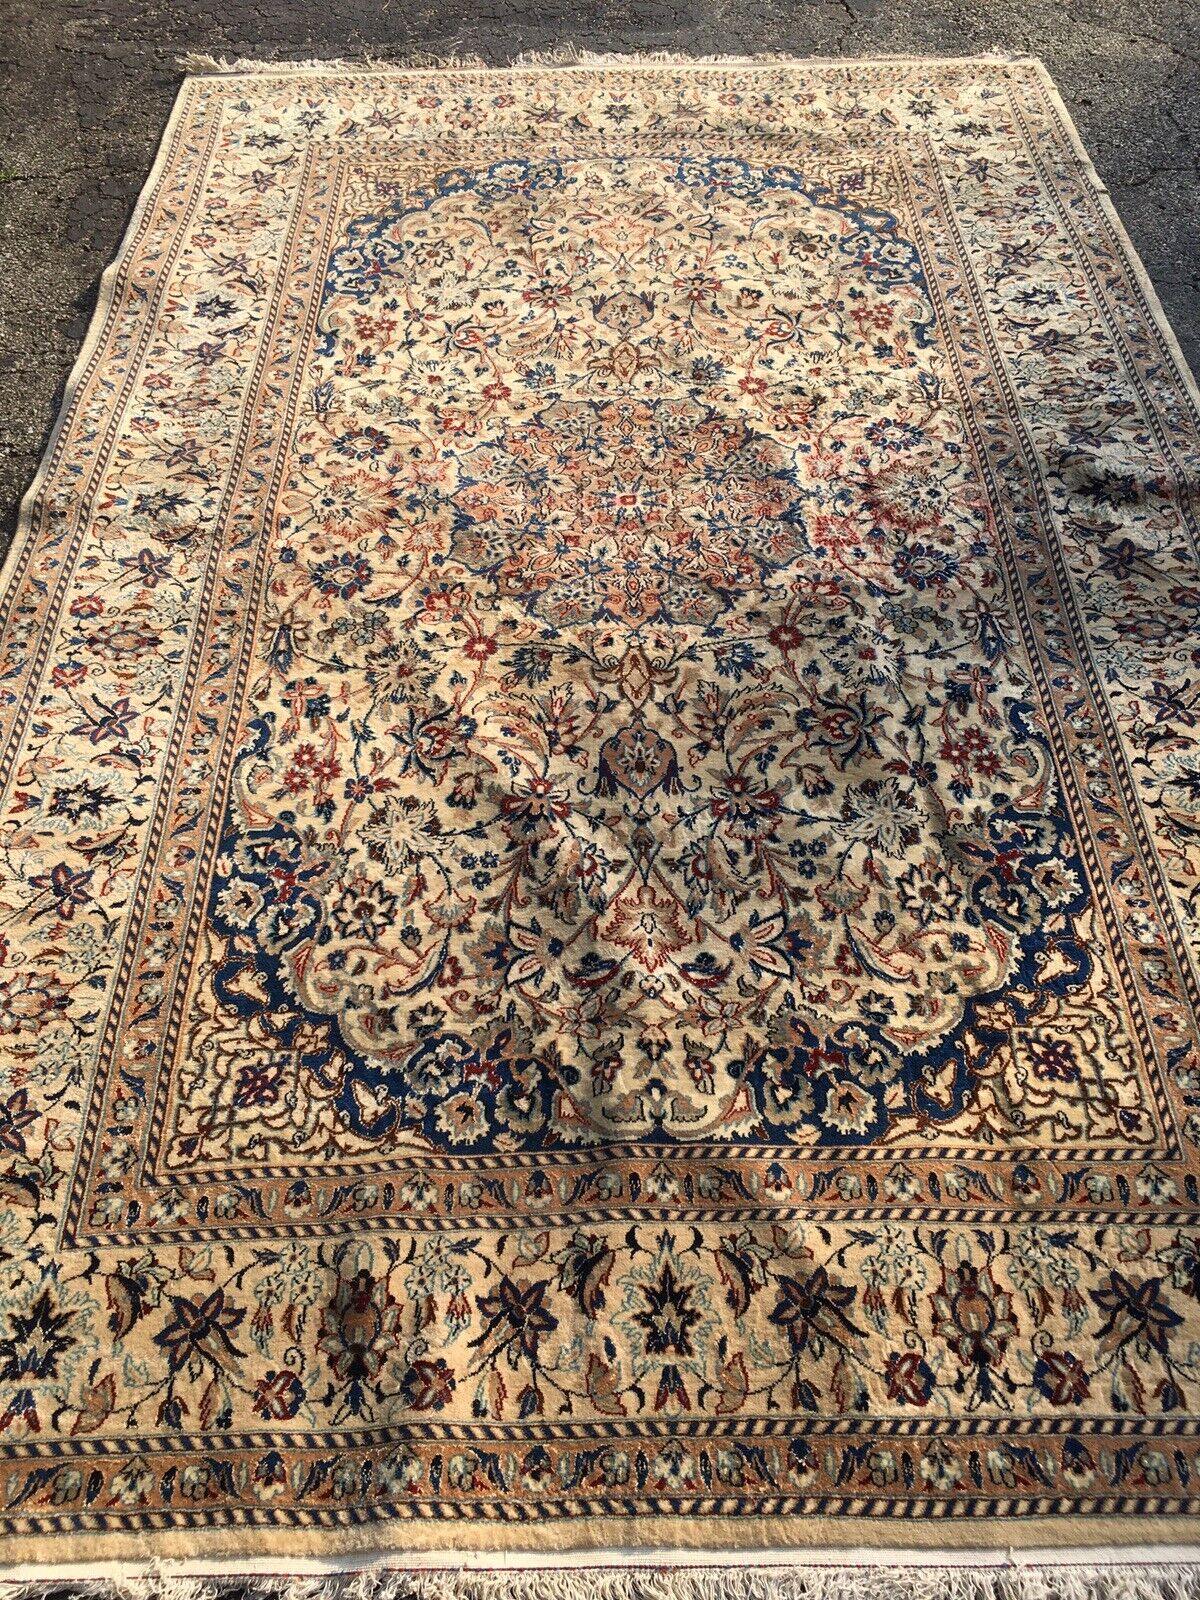 Antique 7'x10' WOOL/SILK Nain Naeen Oriental Area Rug Hand-Knotted Beige